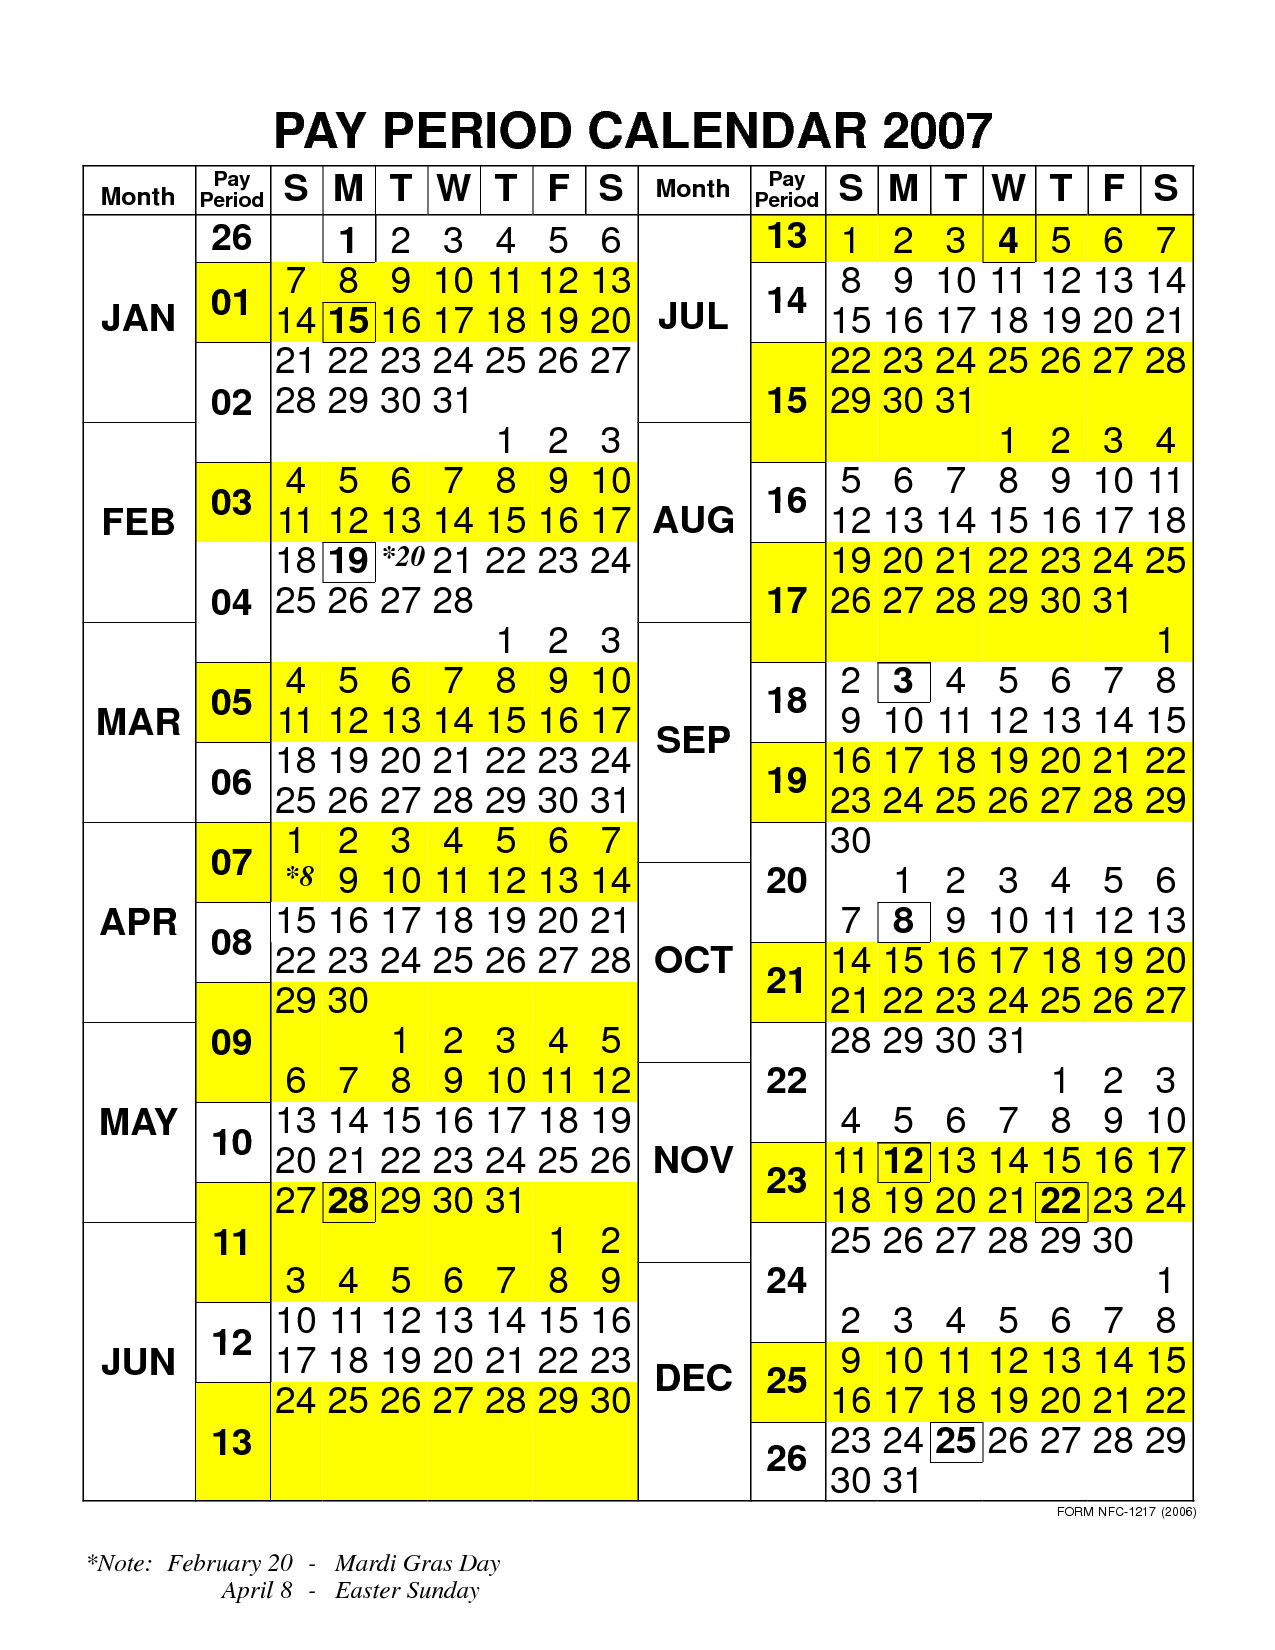 Federal Pay Period Calendar 2021 Your Pay / How many payperiods left